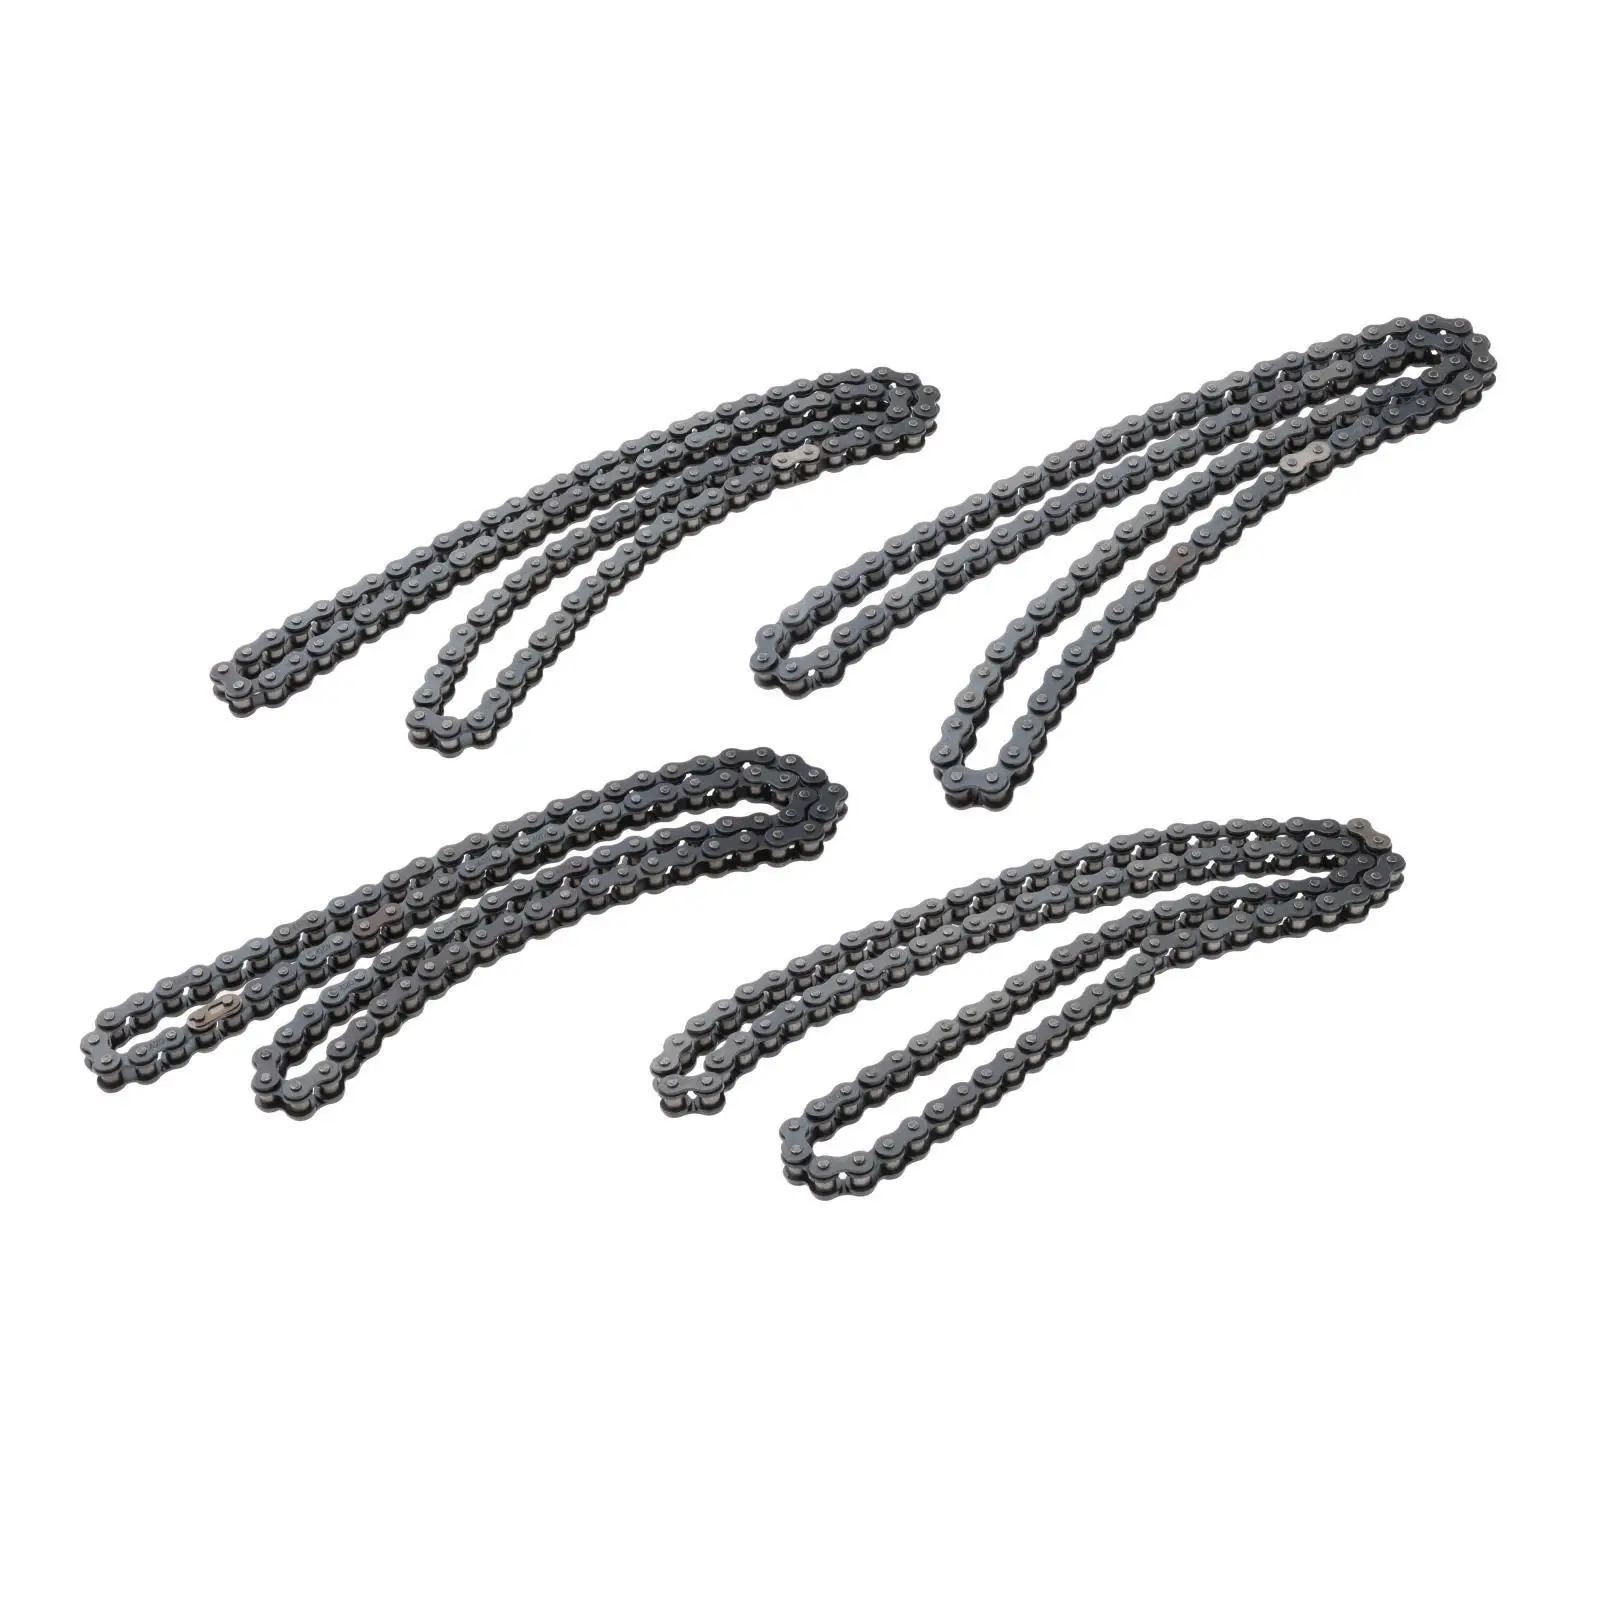 420 Motorcycle Chain 50-110Cc 96L 102L 104L 106L Accessories Motorcycle Chain for Bike